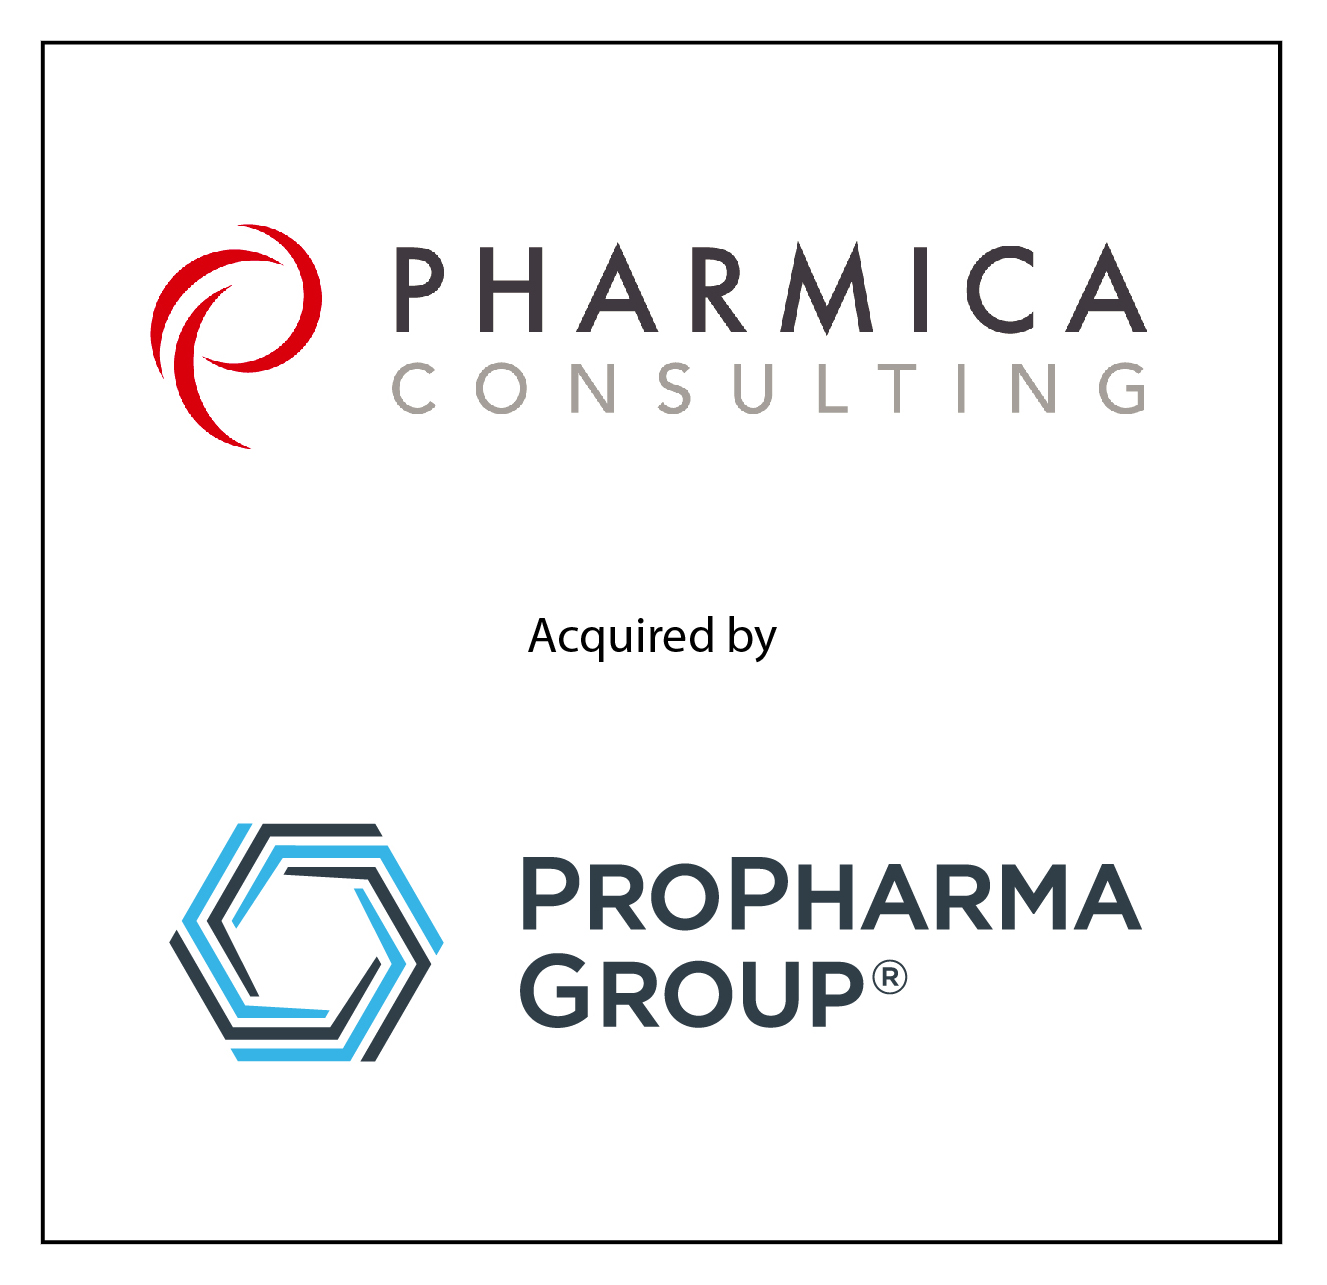 Pharmica Consulting Acquired by ProPharma Group to Provide Holistic Clinical Trial Execution Expertise